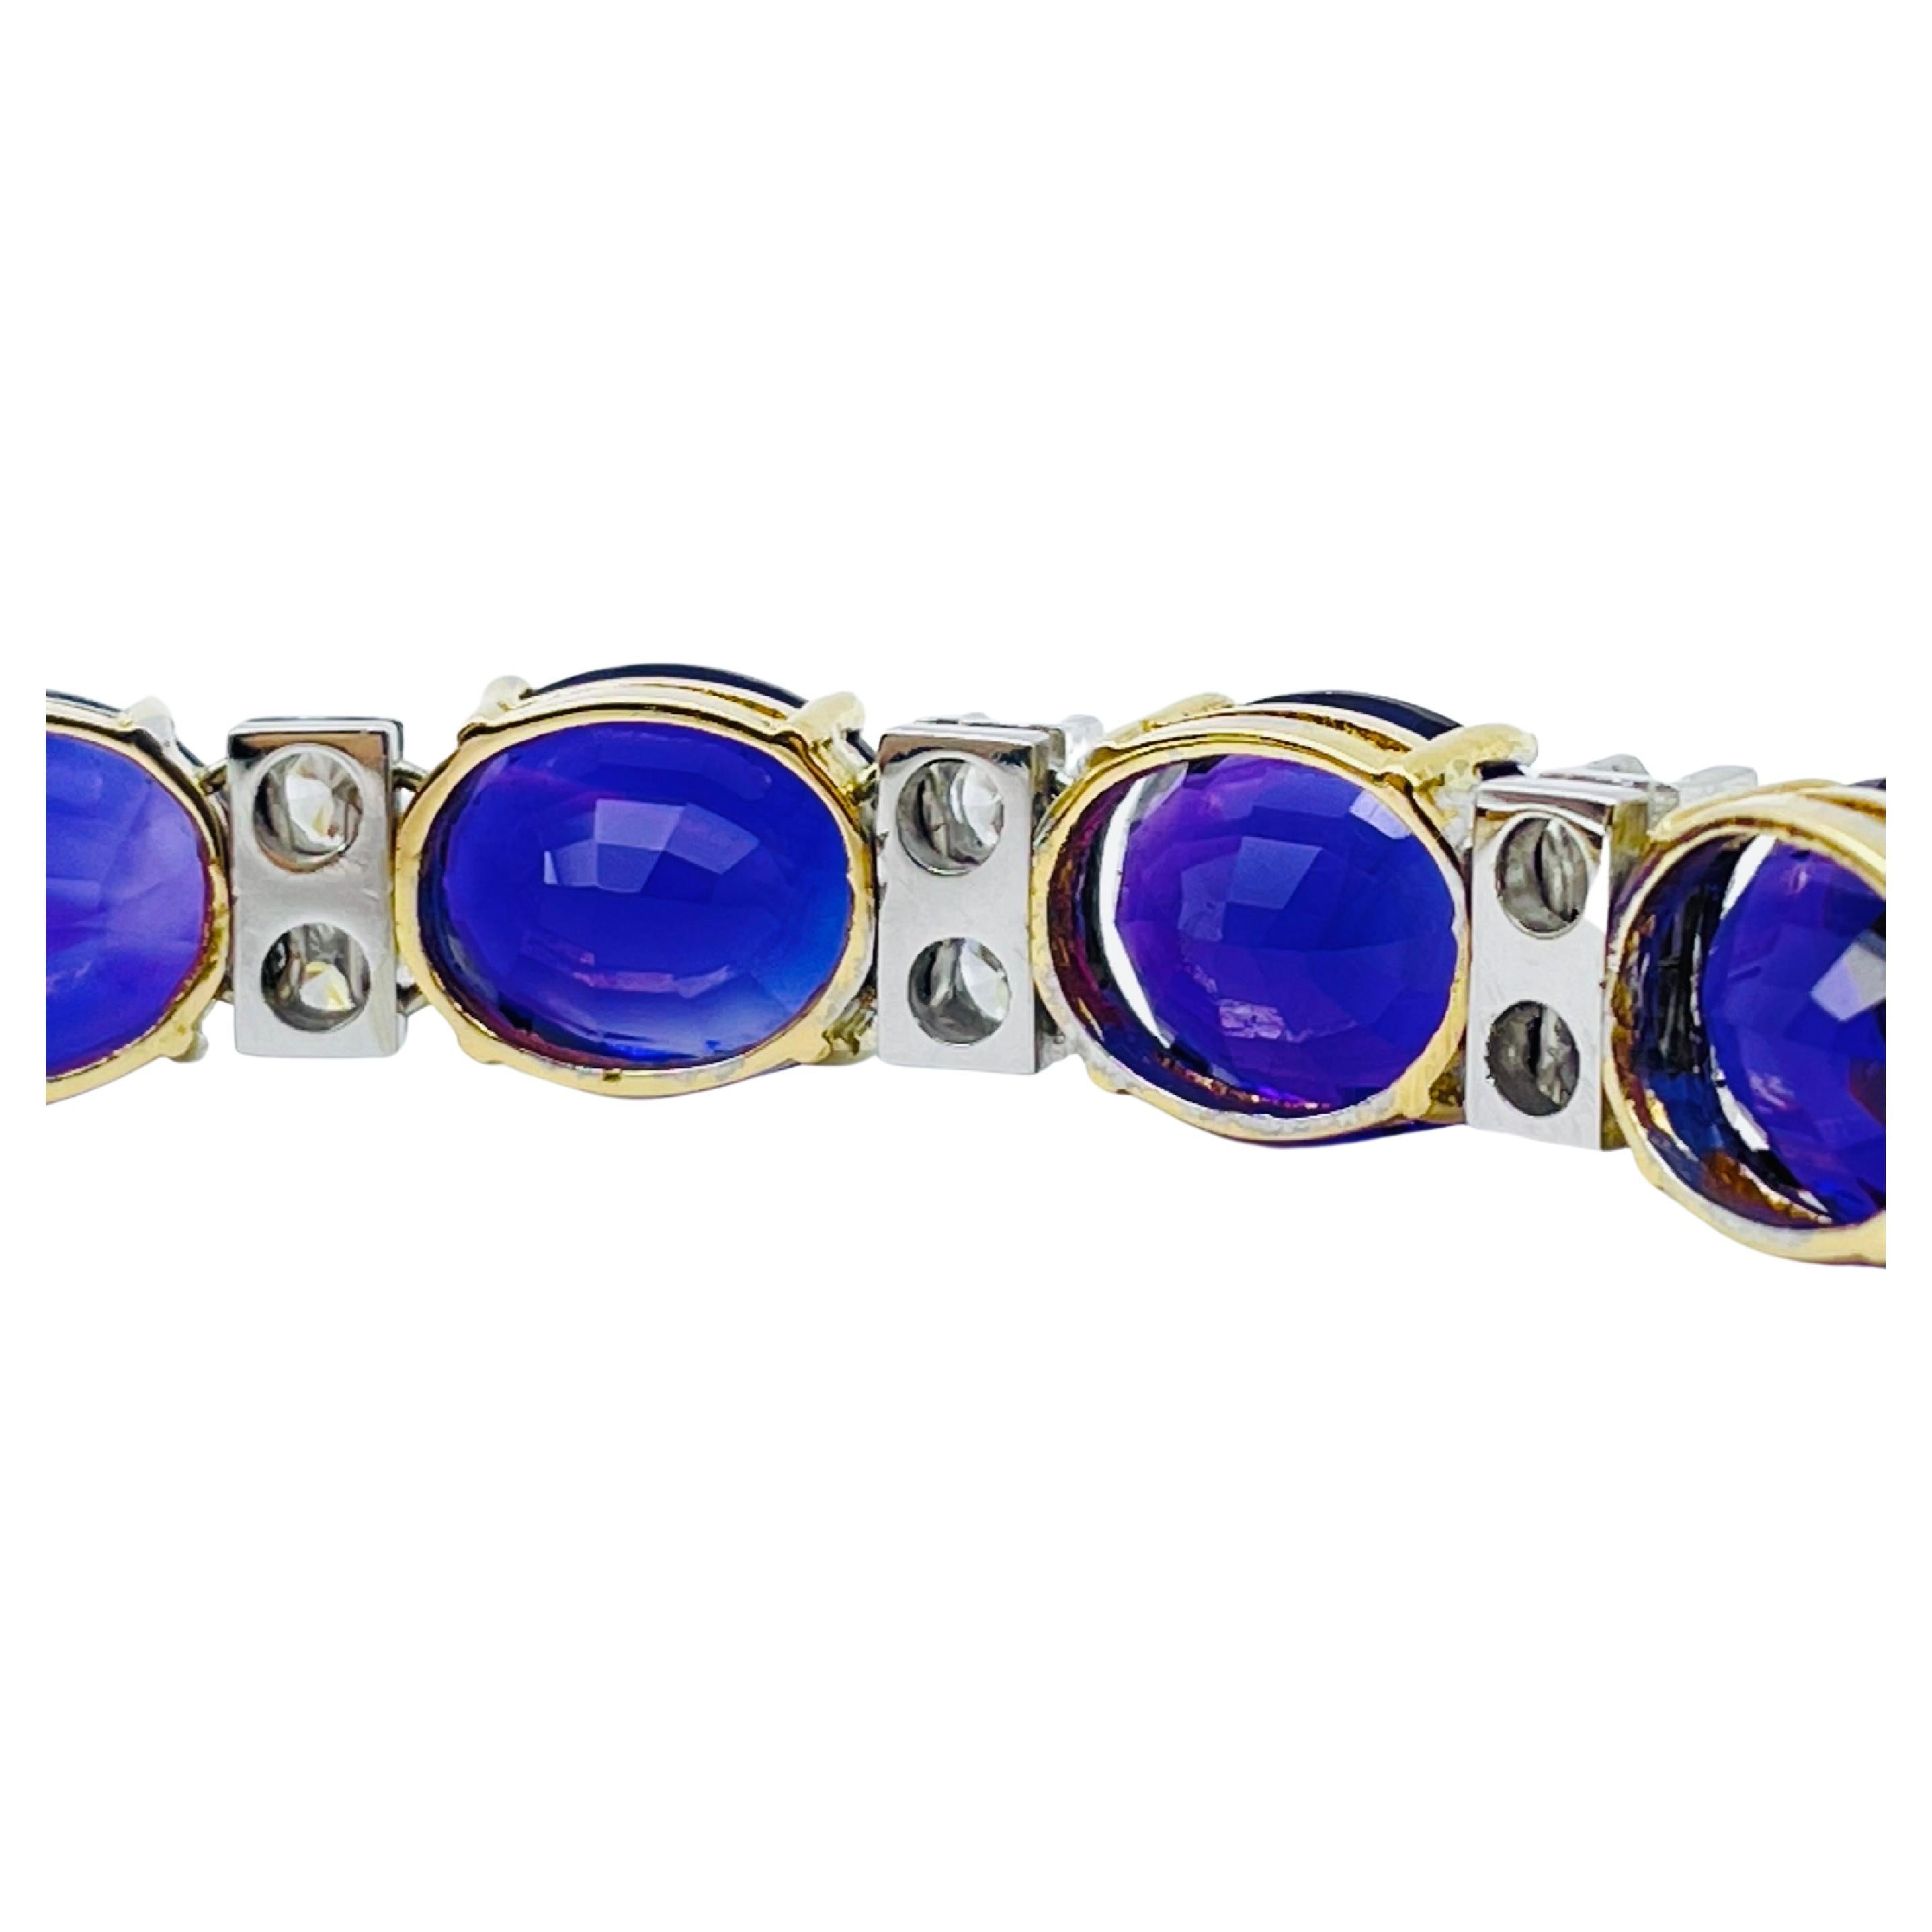 Brilliant Cut Noble Amethyst and Diamond Bracelet, 18k Yellow Gold and White Gold For Sale